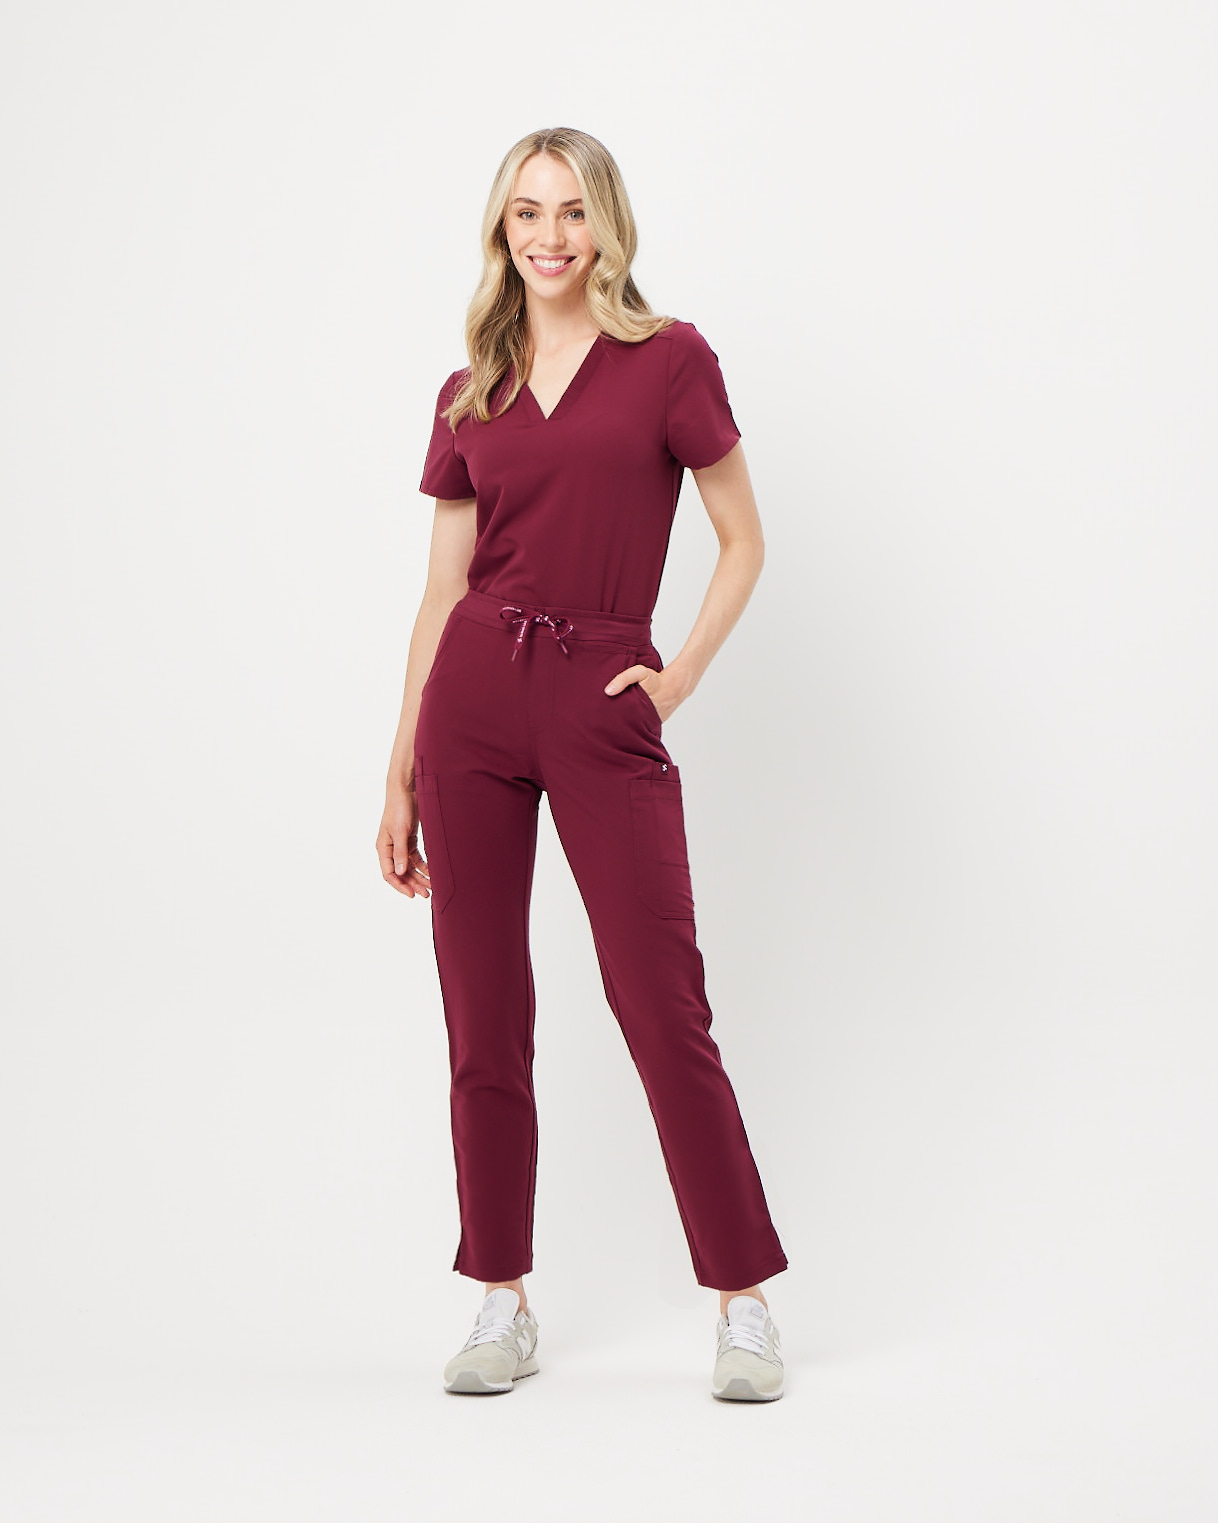 Ultra-Soft Scrubs and Nursing Uniforms for Women – Tagged 